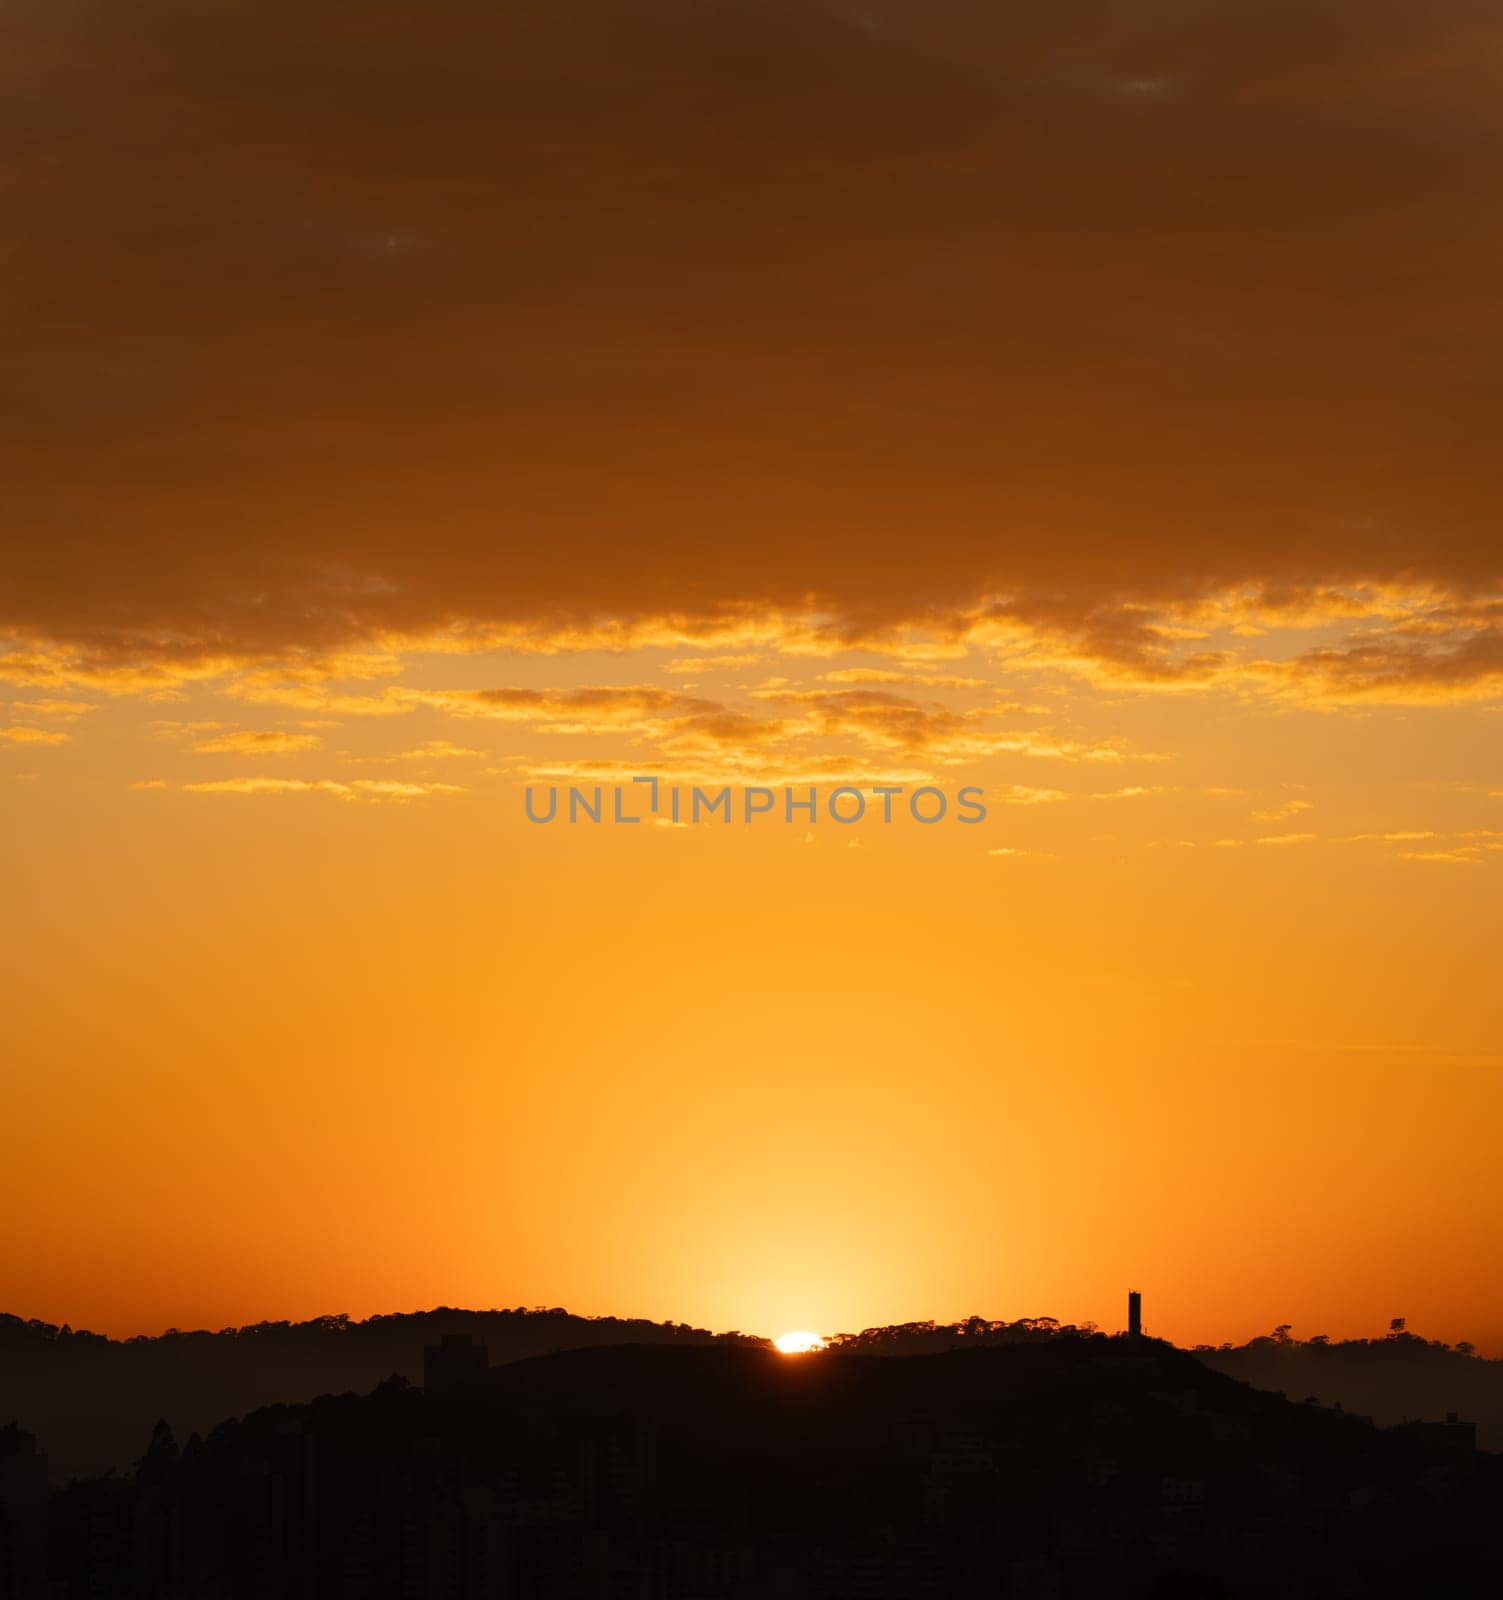 Dramatic sunrise over mountain silhouette and tower against orange sky, ideal for backgrounds or text space